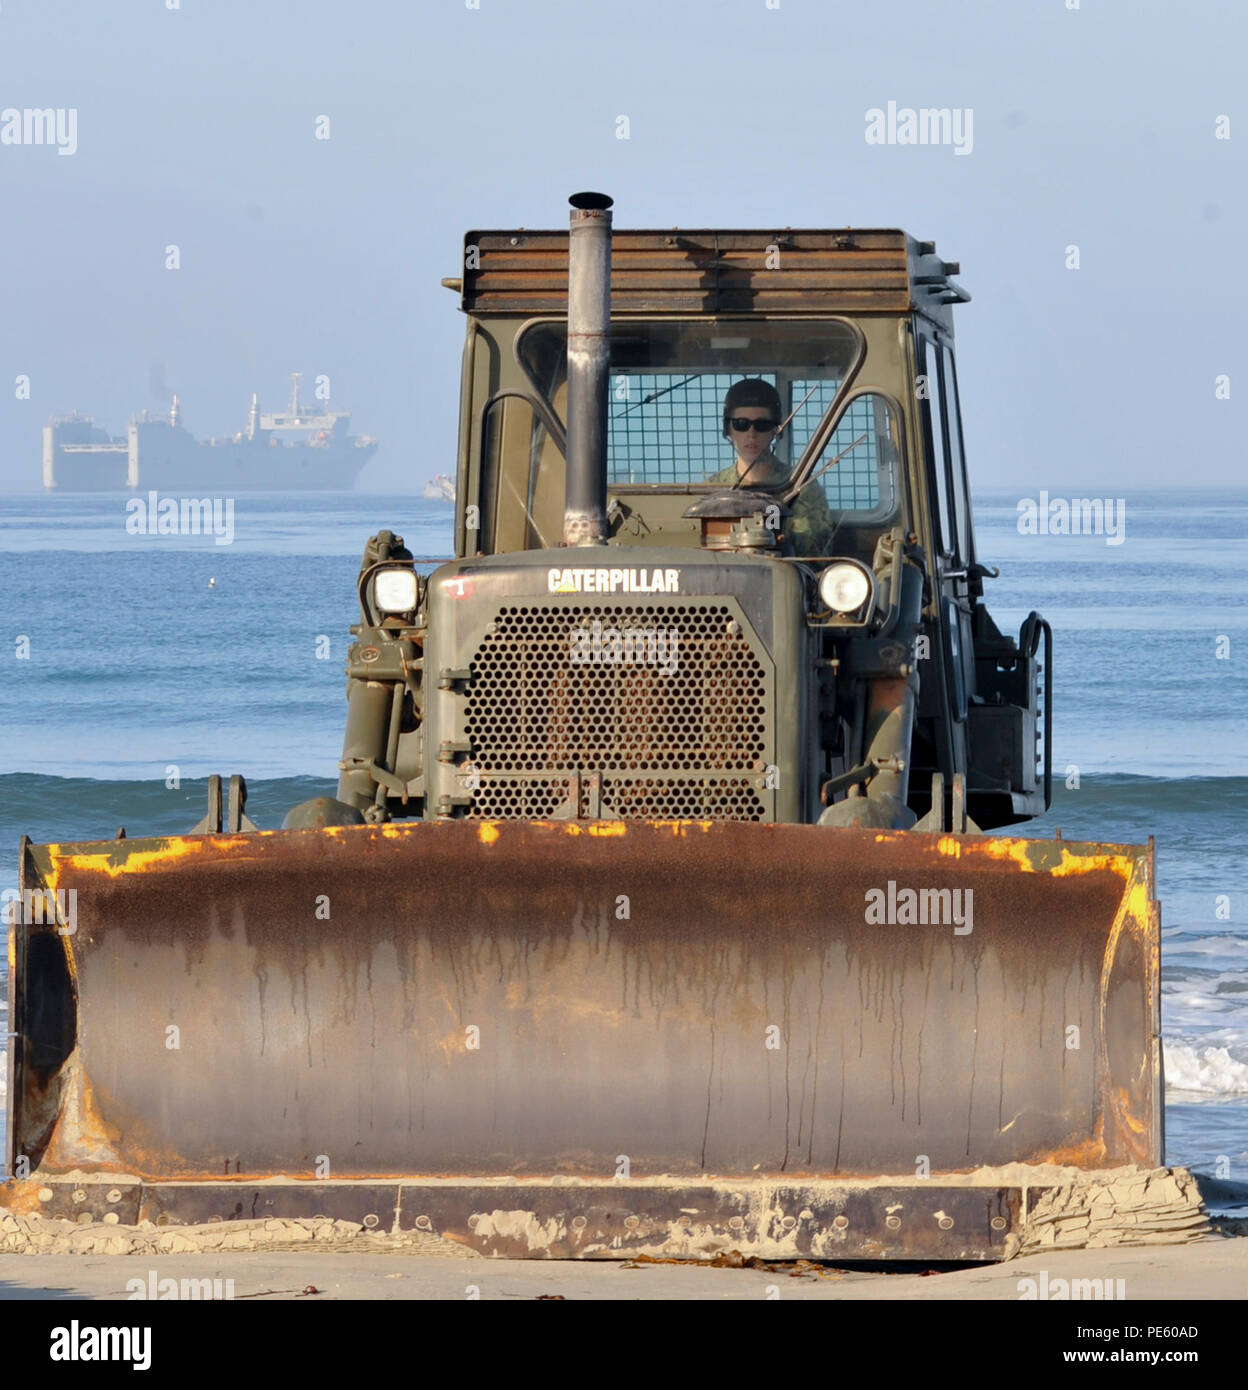 150925-N-KK081-103 SAN DIEGO (Sept. 25, 2015) – Equipment Operator Constructionman Harley Suttles, attached to Amphibious Construction Battalion (ACB) 1’s Alfa Company, drives bulldozer to build a sand ramp during Exercise Brilliant Zenith 2015 (BZ15). BZ15 is an assault follow-on echelon exercise designed to conduct ship-to-shore transportation of Navy cargo with the Improved Navy Lighterage System Floating Causeway embarked on SS Cape Mohican (T-AKR 5065) and improve interoperability with Naval Beach Group 1, ACB 2, Expeditionary Warfare Training Group, Pacific and Navy Cargo Handling Battal Stock Photo